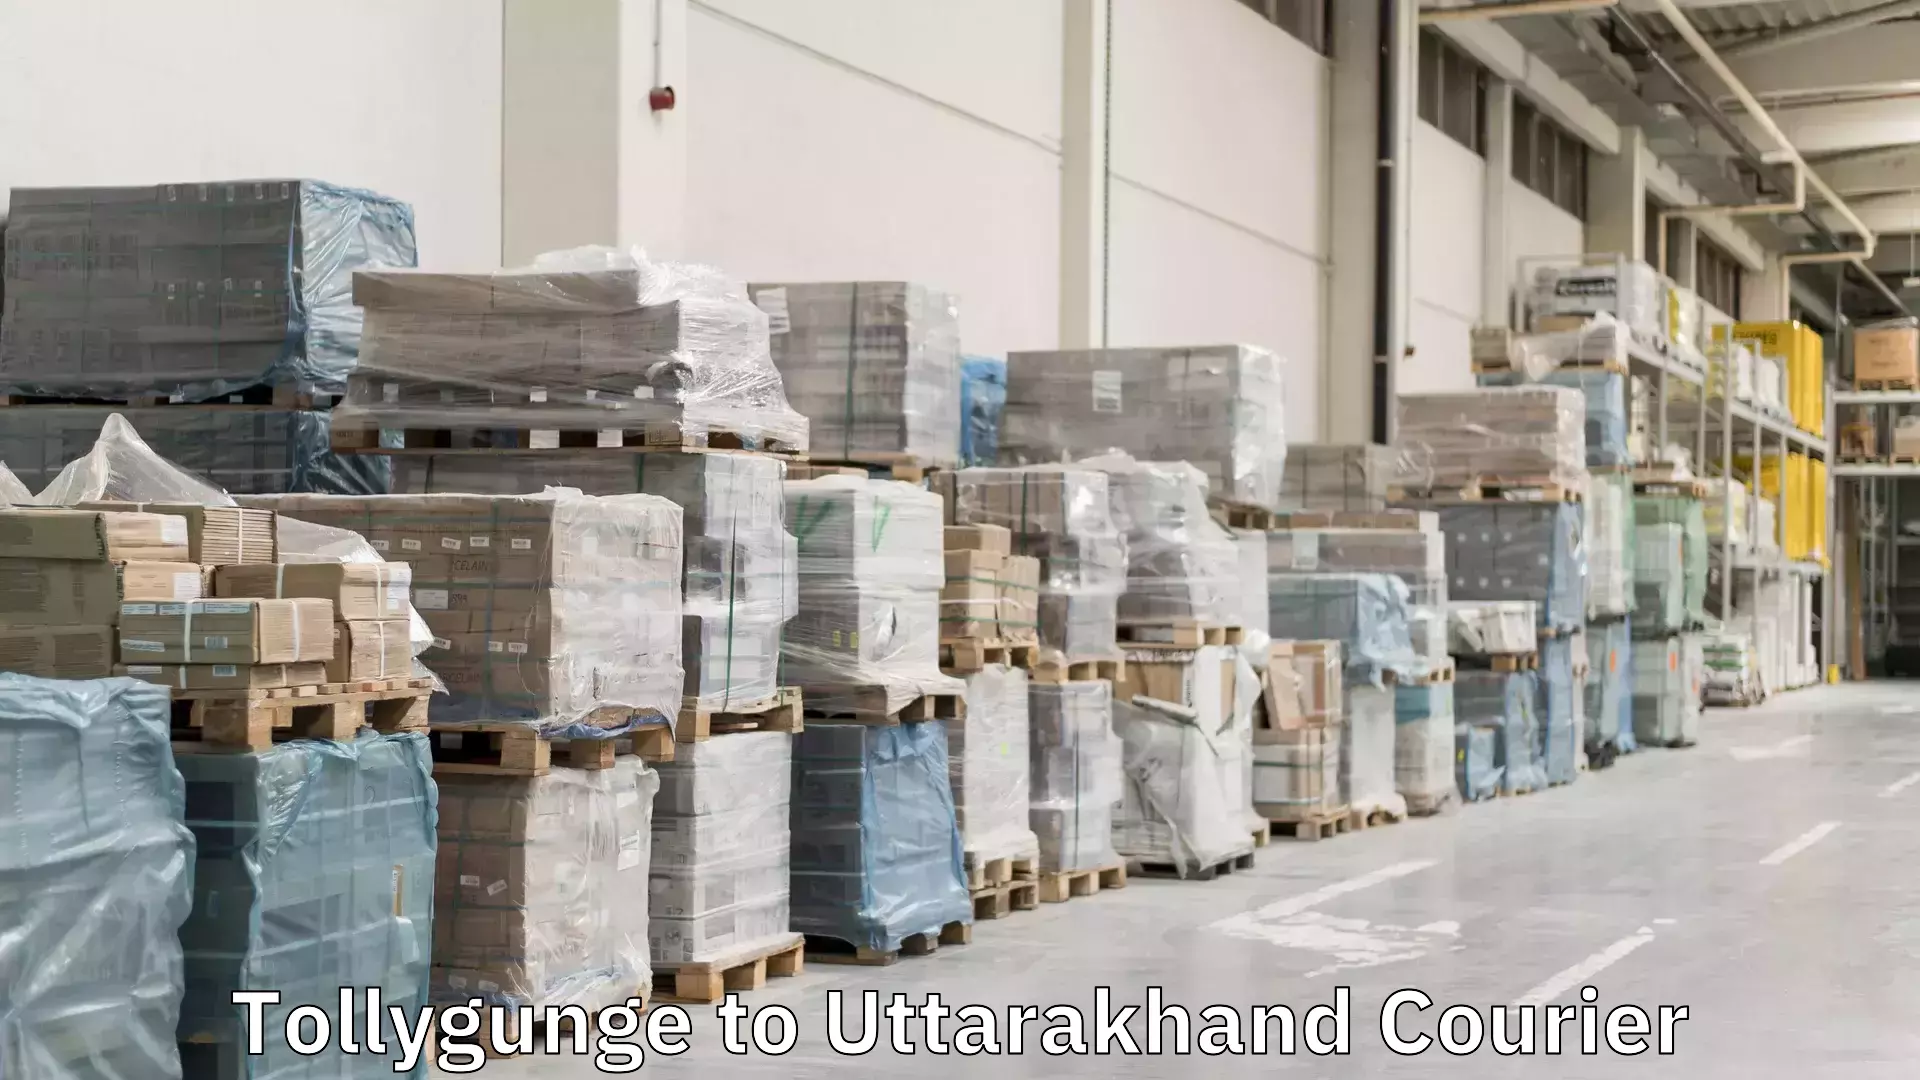 Round-the-clock parcel delivery Tollygunge to Uttarakhand